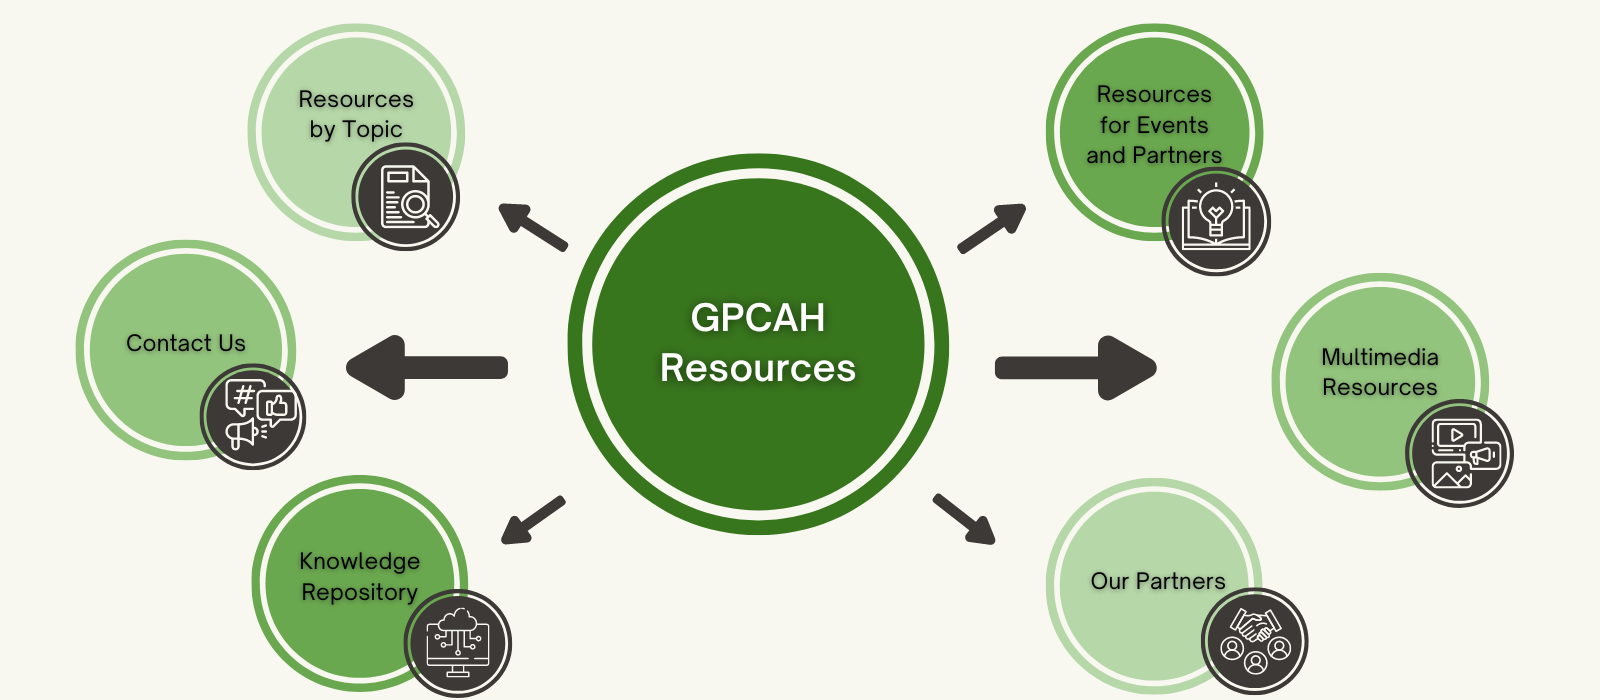 GPCAH Resources - Resources by Topic, Resources for Events and Partners, Multimedia Resources, Knowledge Repository, Contact Us